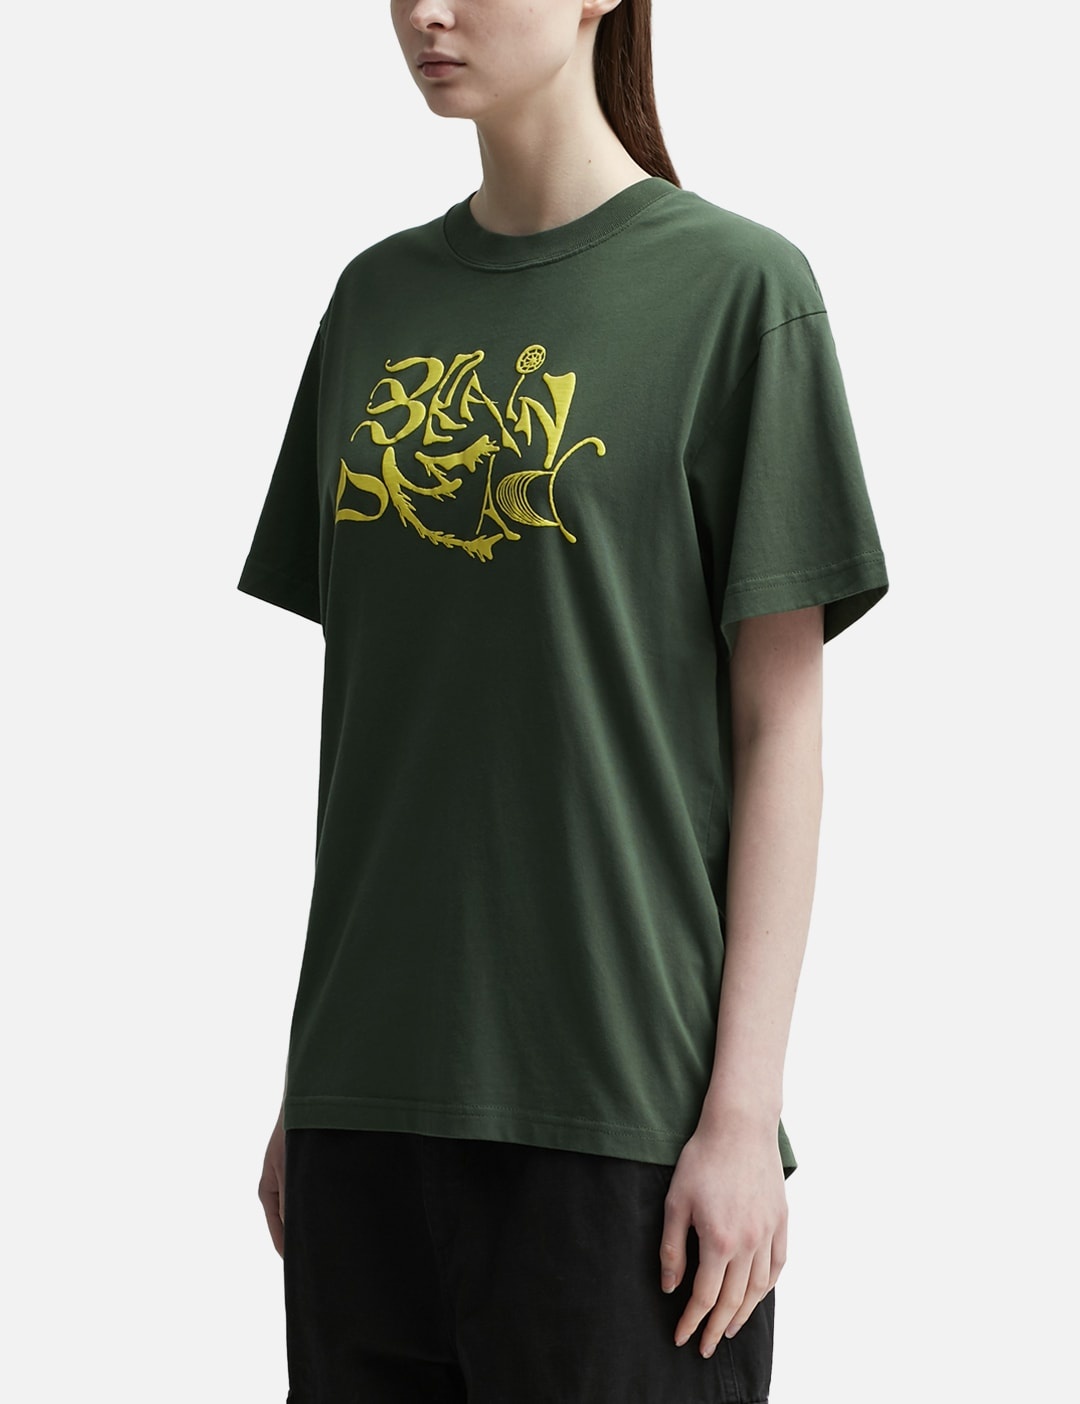 NEW AGE T-SHIRT - 2